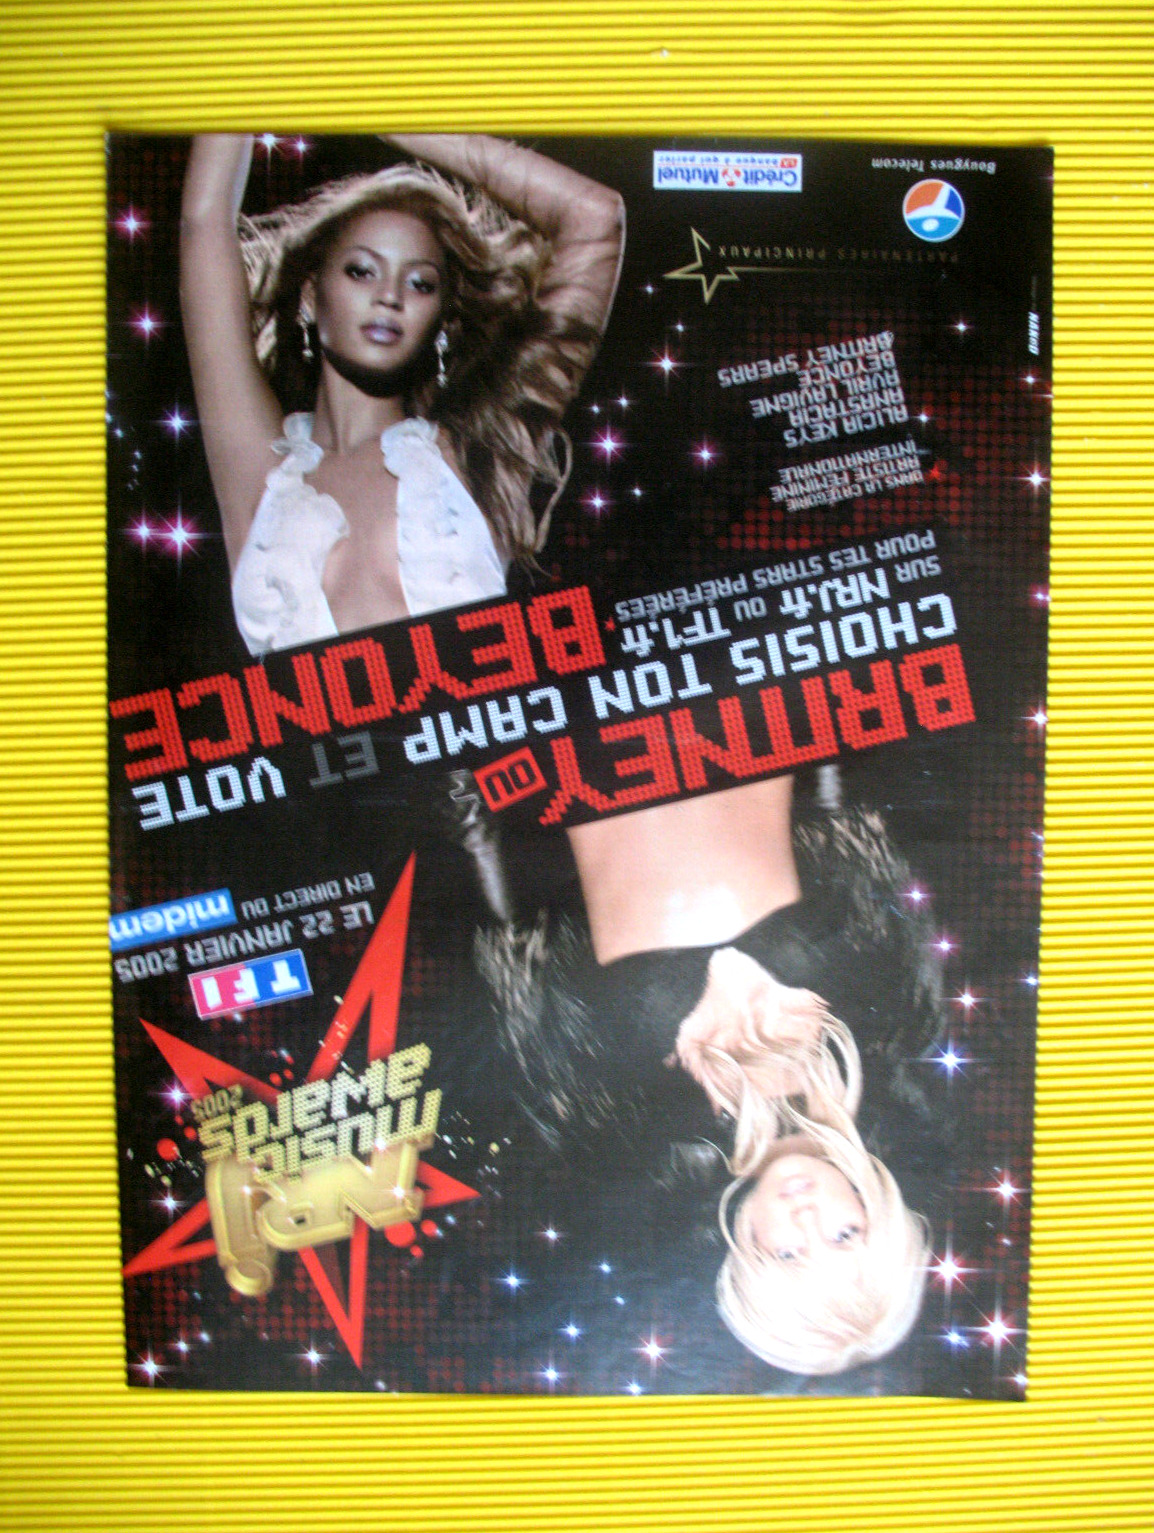 2004 NRJ RADIO VOTE MUSIC AWARDS BRITNEY OR BEYONCE AD PRESS RELEASE